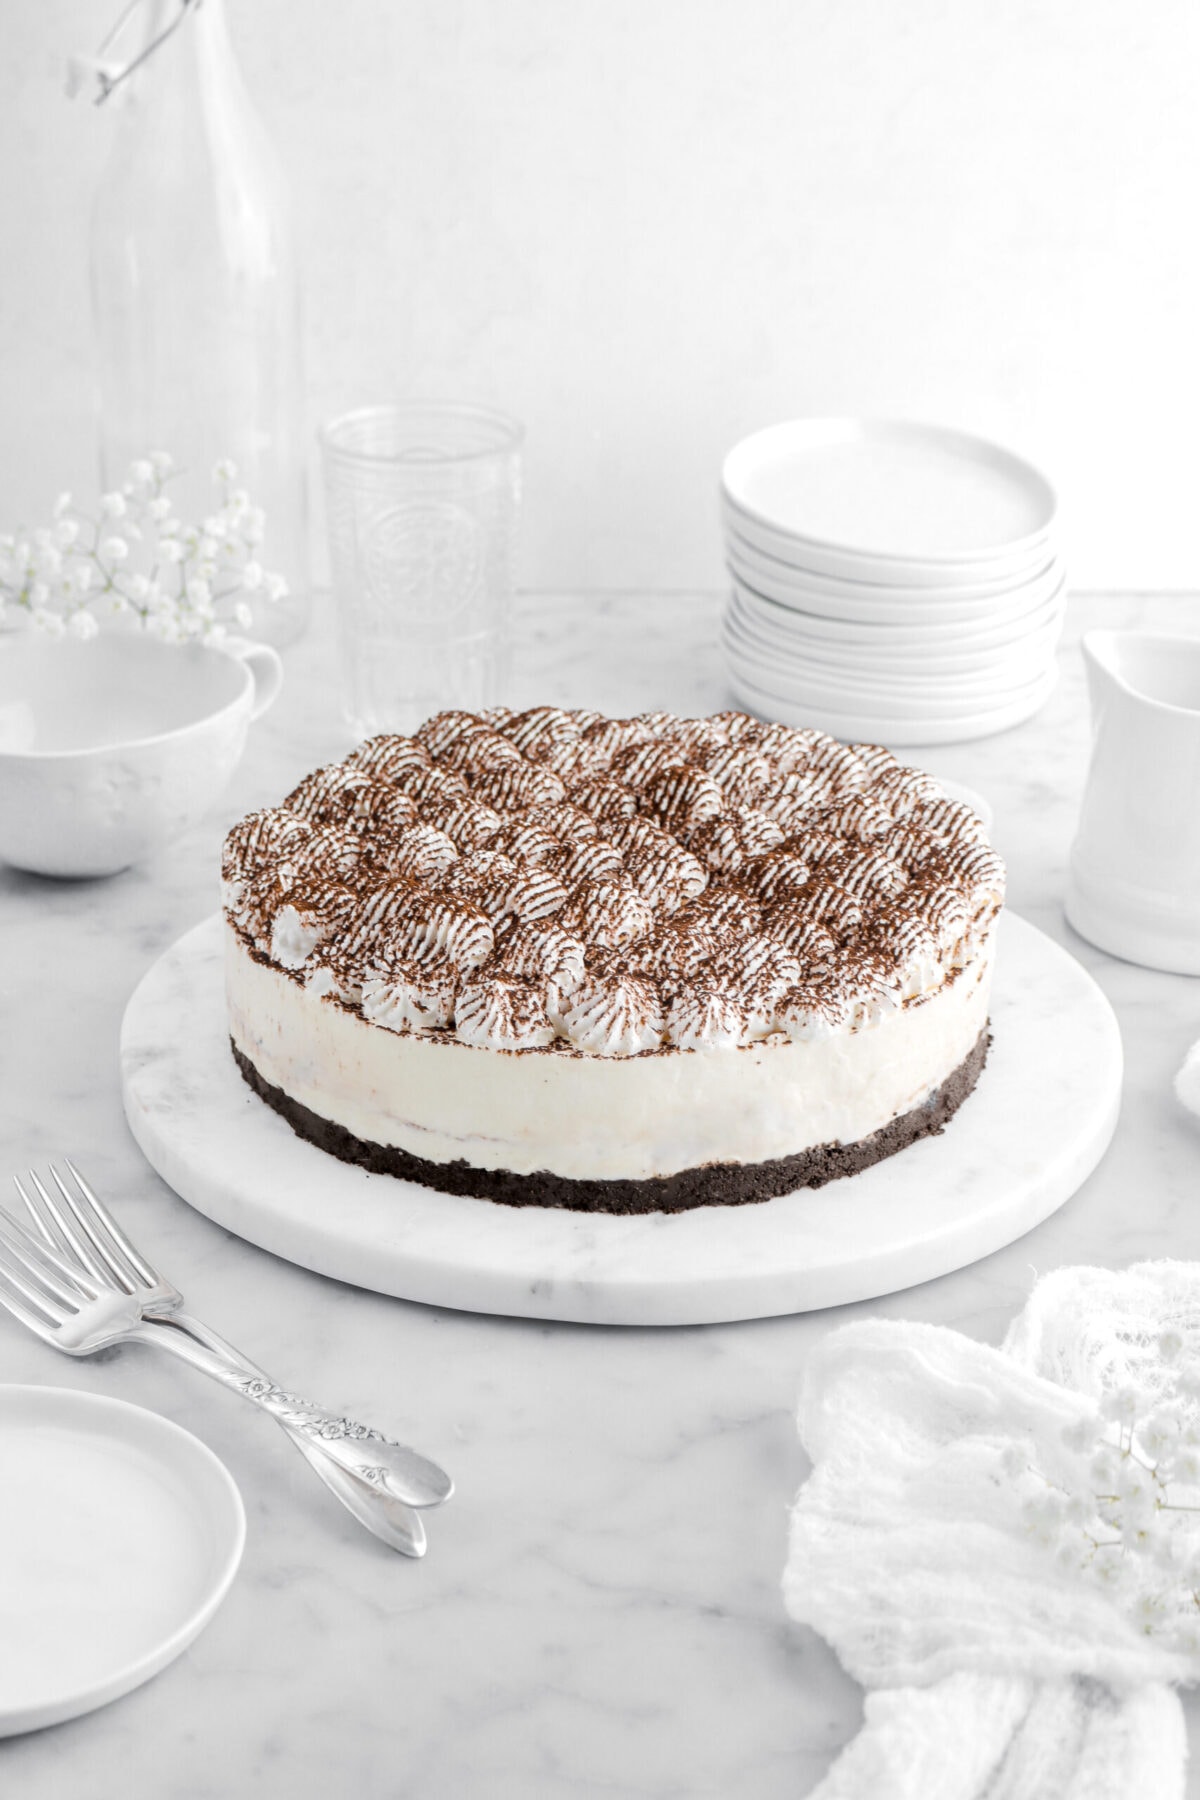 angled shot of tiramisu cheesecake on round marble tray with two forks beside, a white cheesecloth, white flowers, a stack of plates, and two empty glasses behind on marble surface.